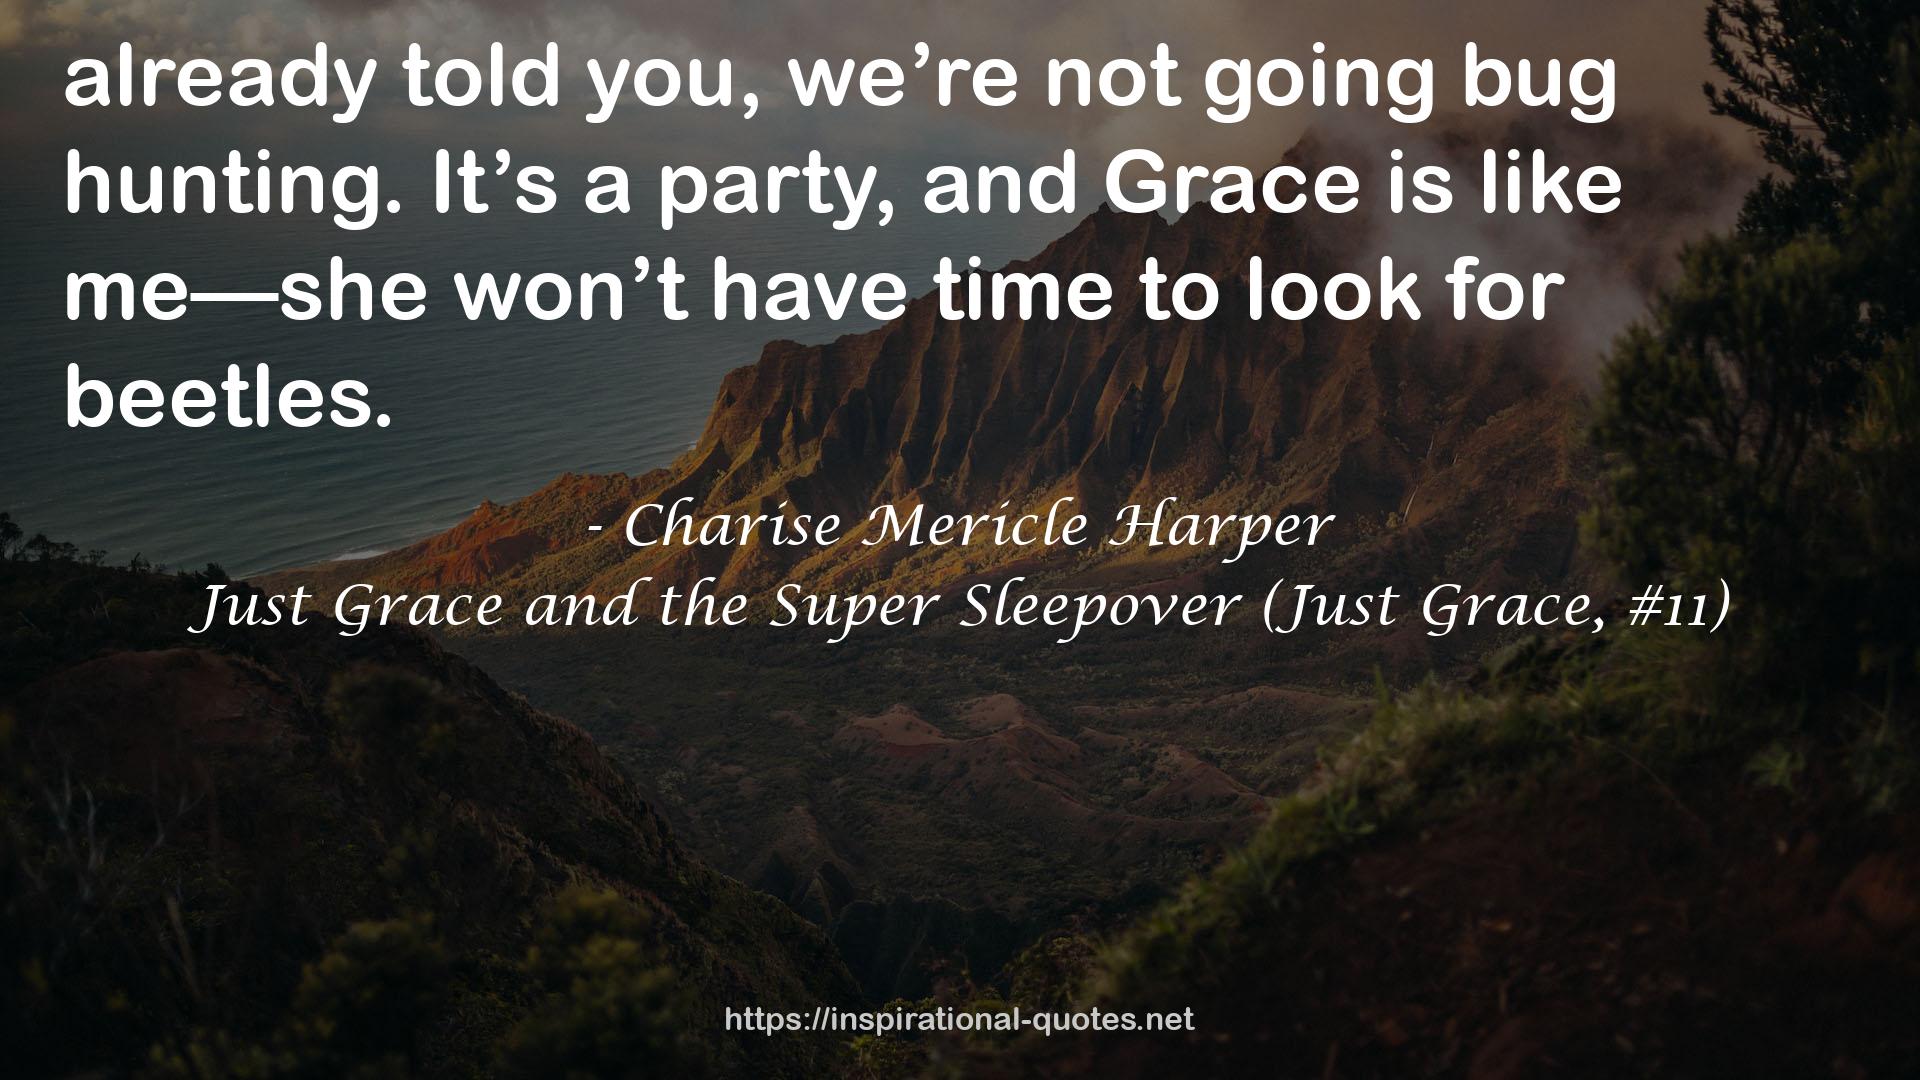 Just Grace and the Super Sleepover (Just Grace, #11) QUOTES